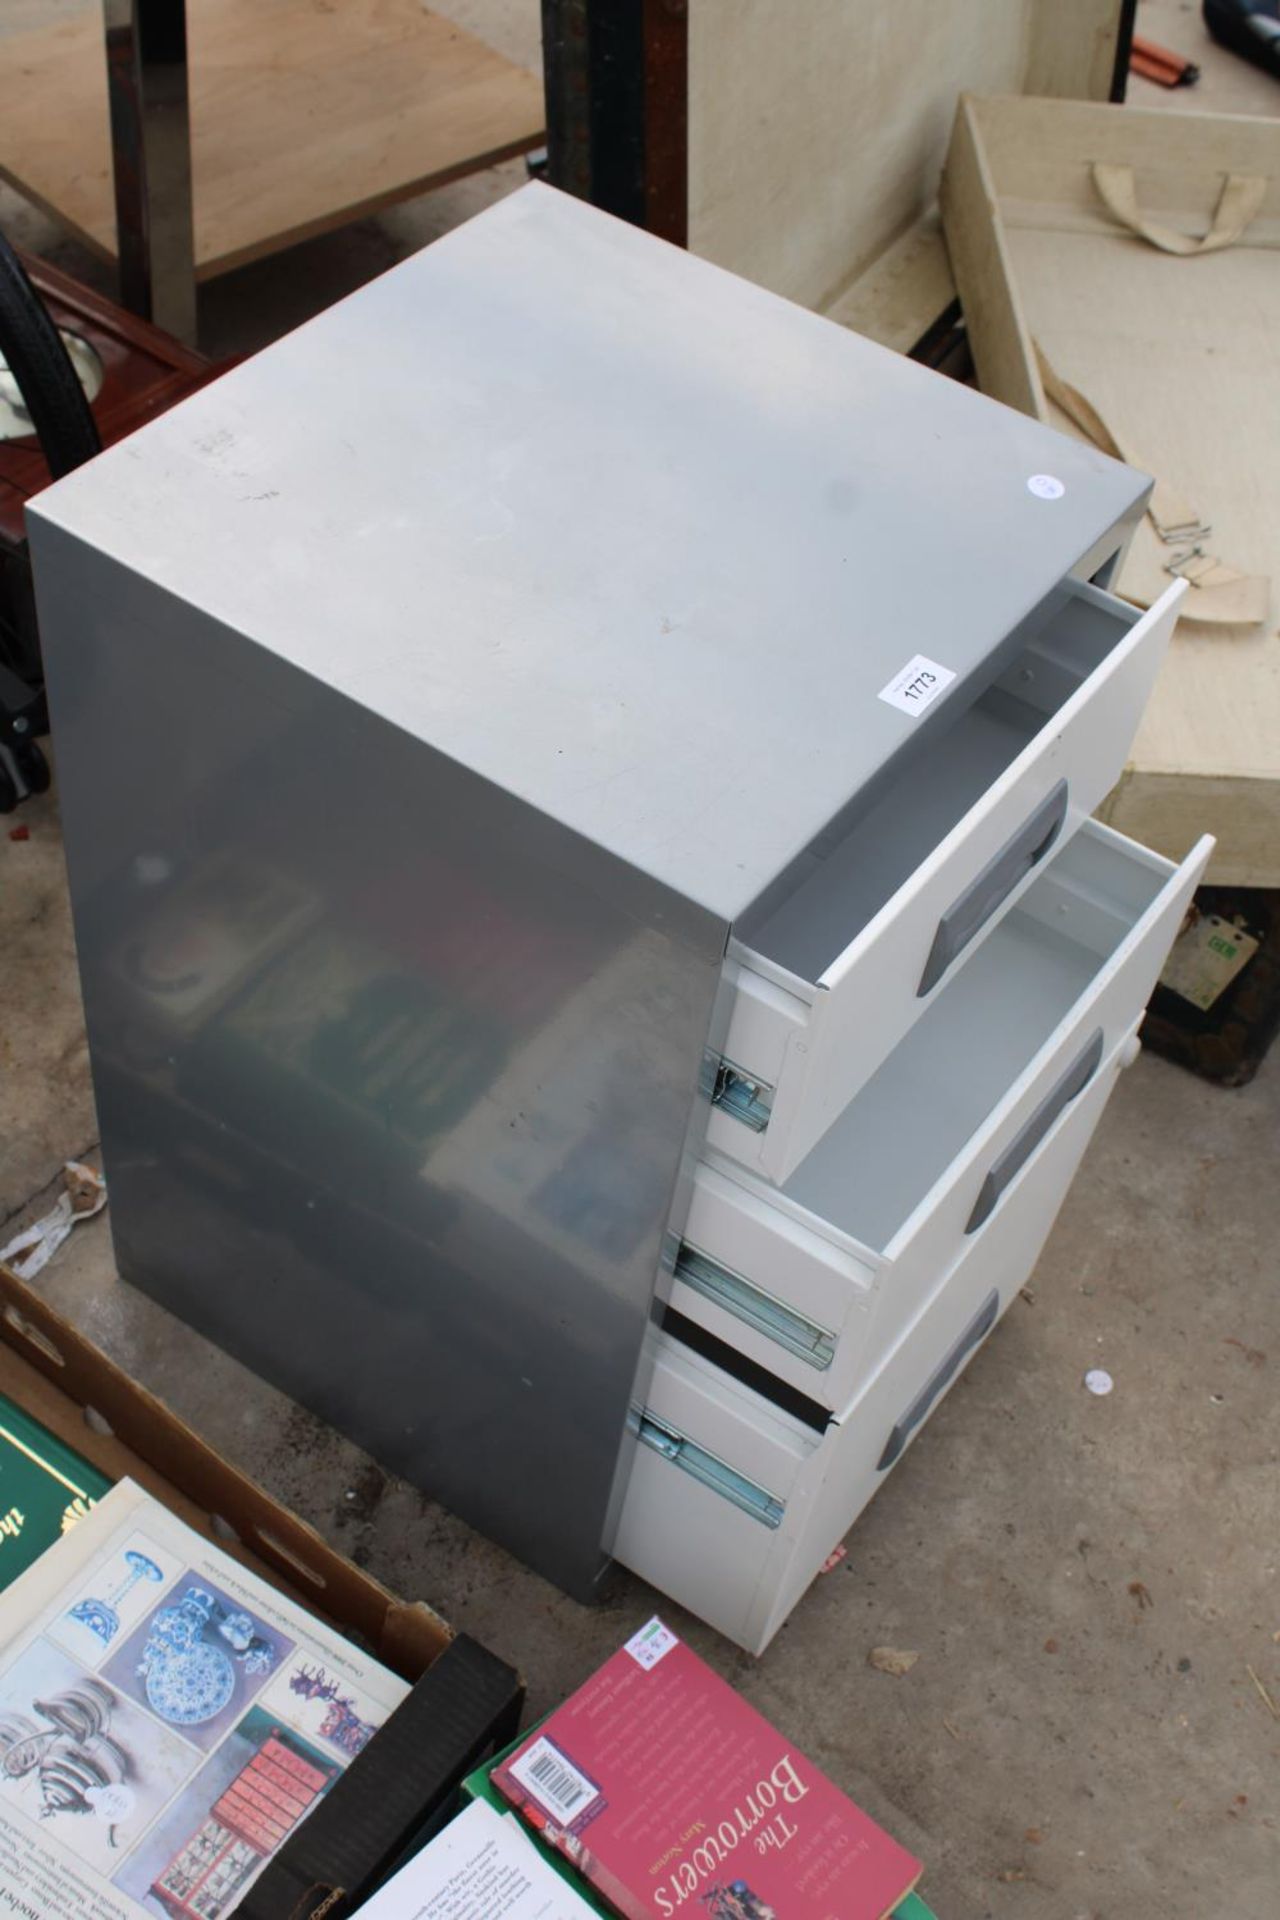 A THREE DRAWER METAL FILING CABINET - Image 2 of 2